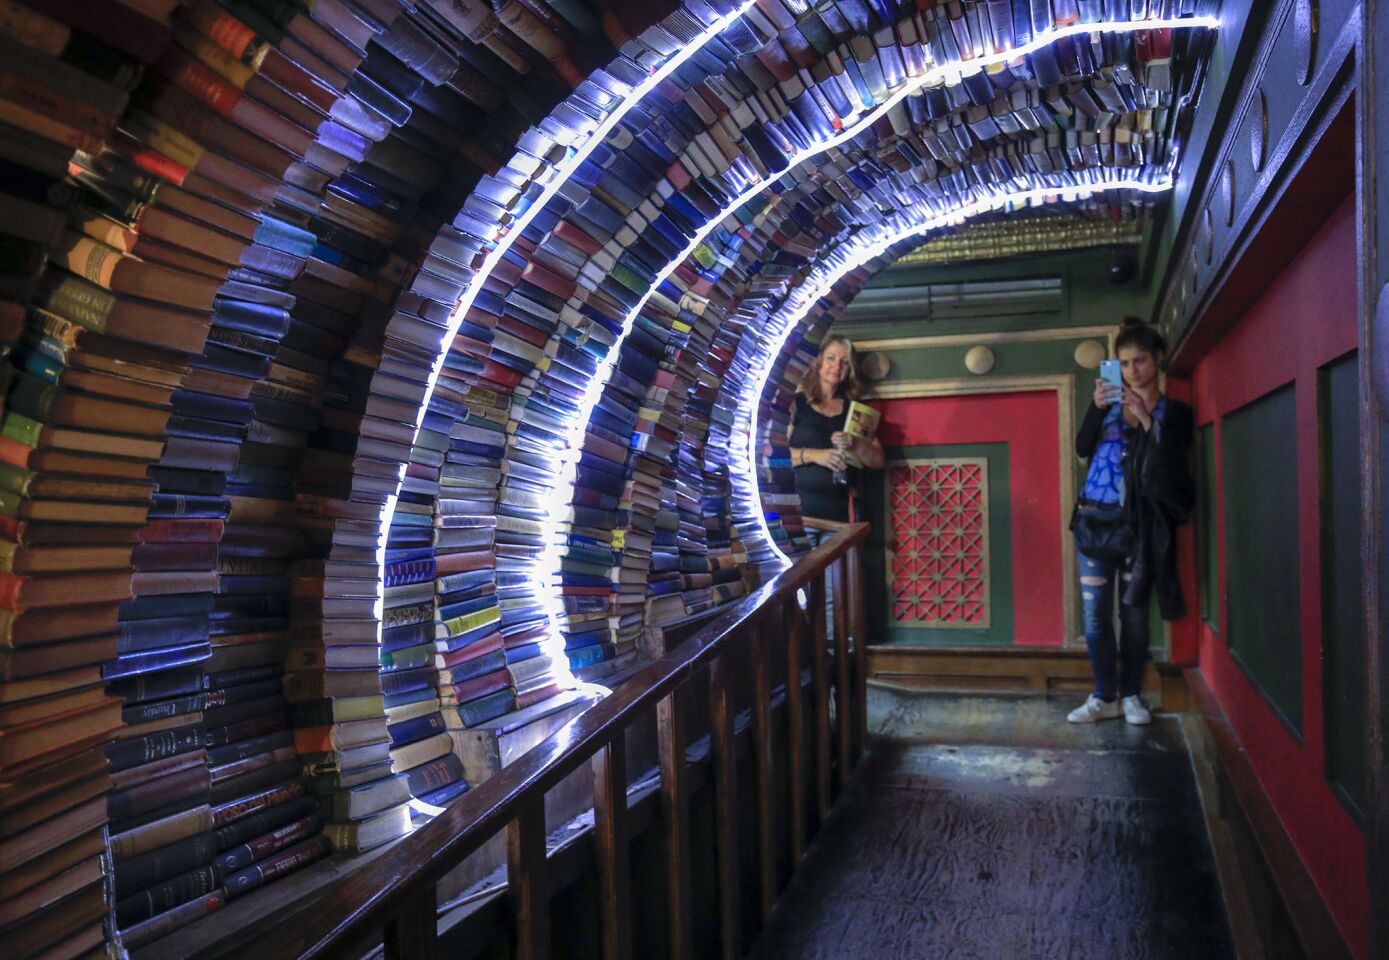 The book tunnel and labyrinth area on the second floor are Instagrammable favorites.